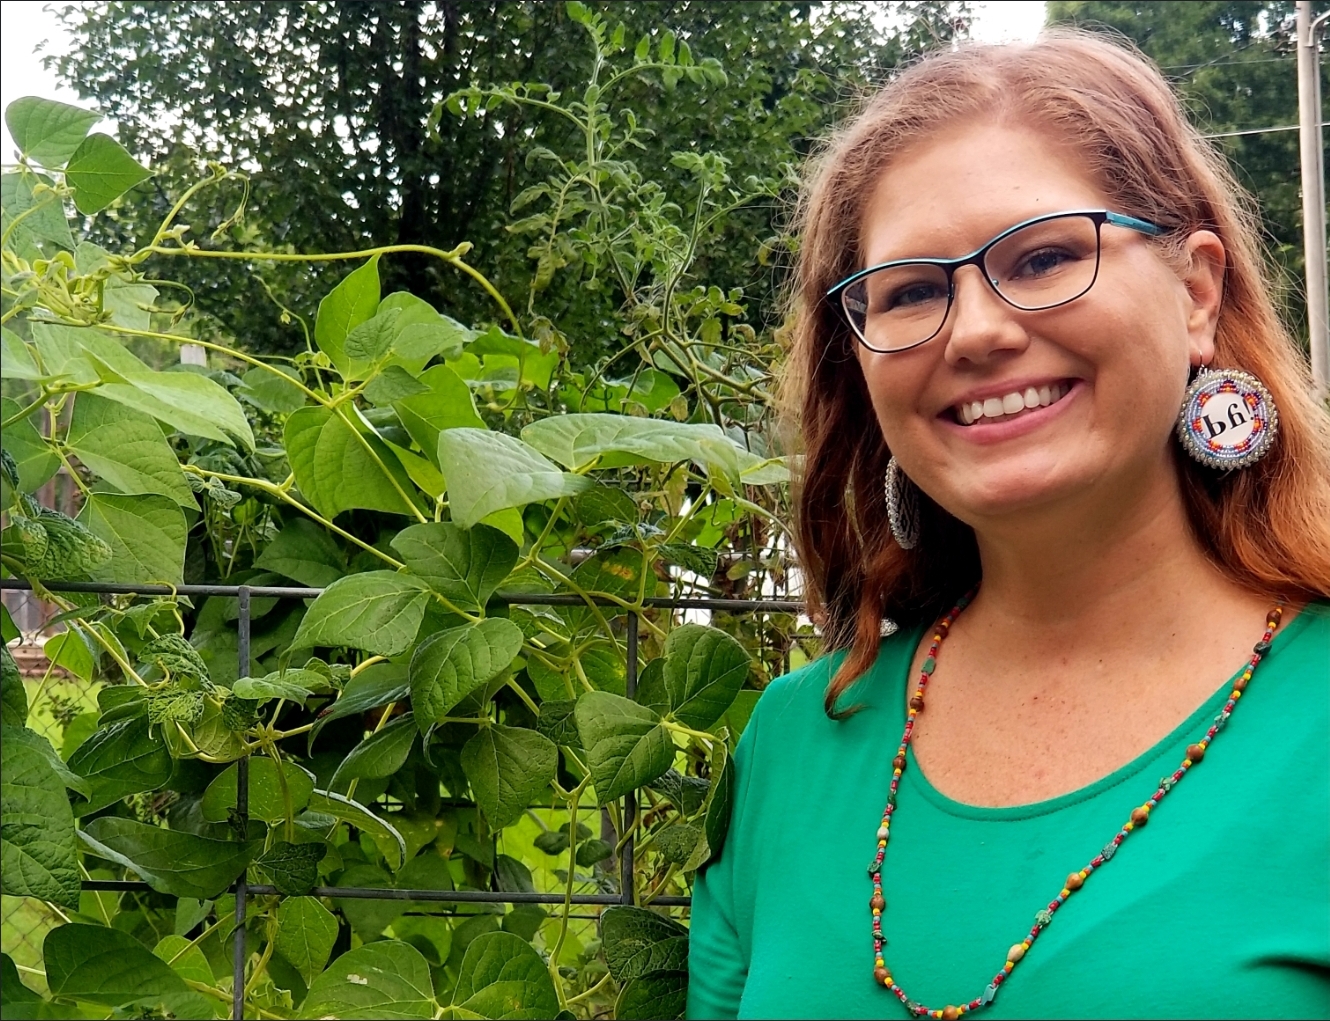 A woman wearing glasses and round dangly earrings stands at the right of the picture next to plants. She smiles at the camera.